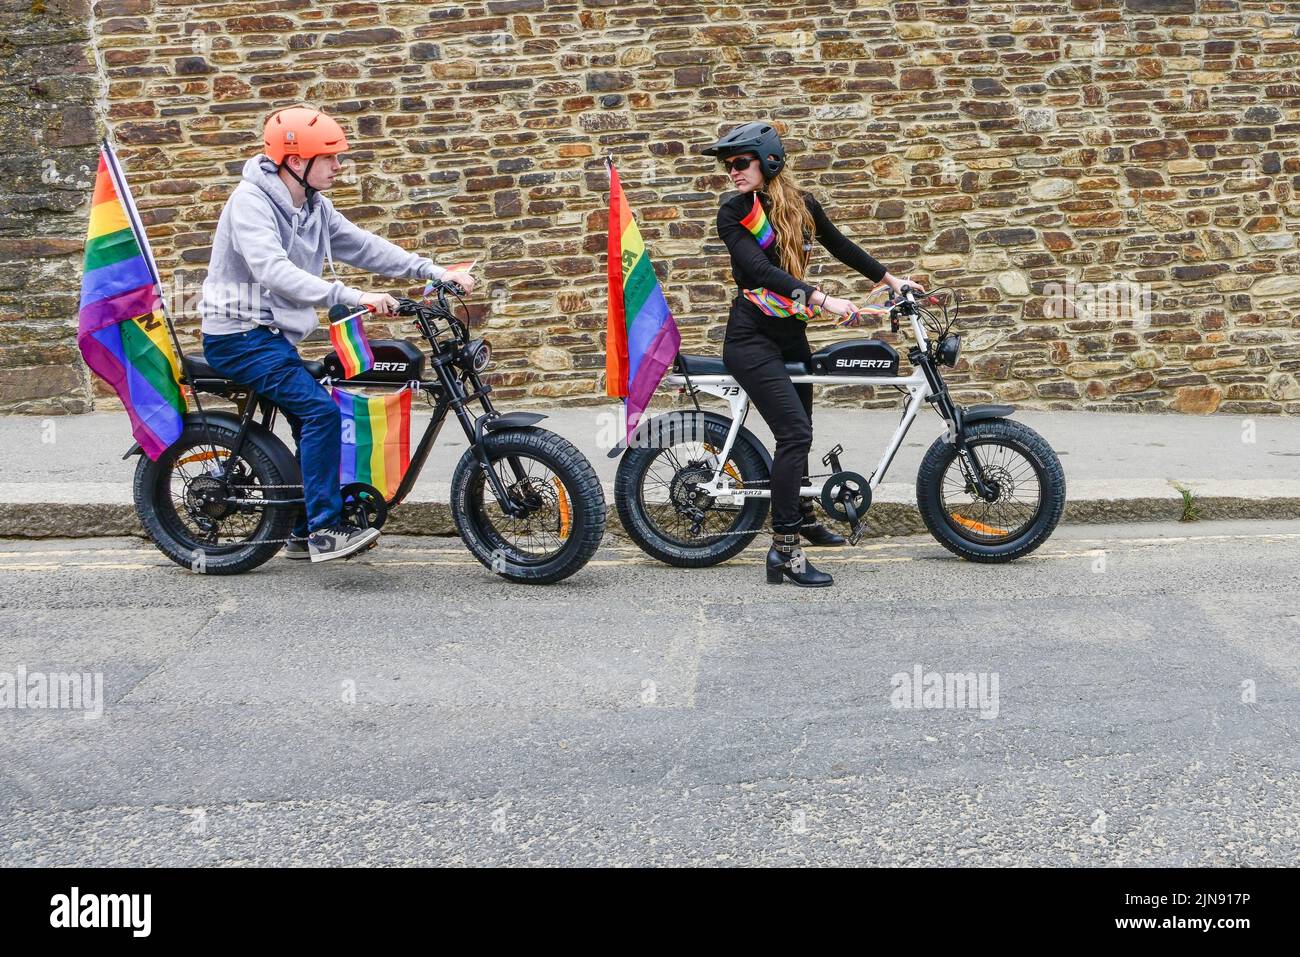 The riders using electric Super 73 bicycles at the start of the vibrant colourful Cornwall Prides Pride parade in Newquay Town centre in the UK. Stock Photo